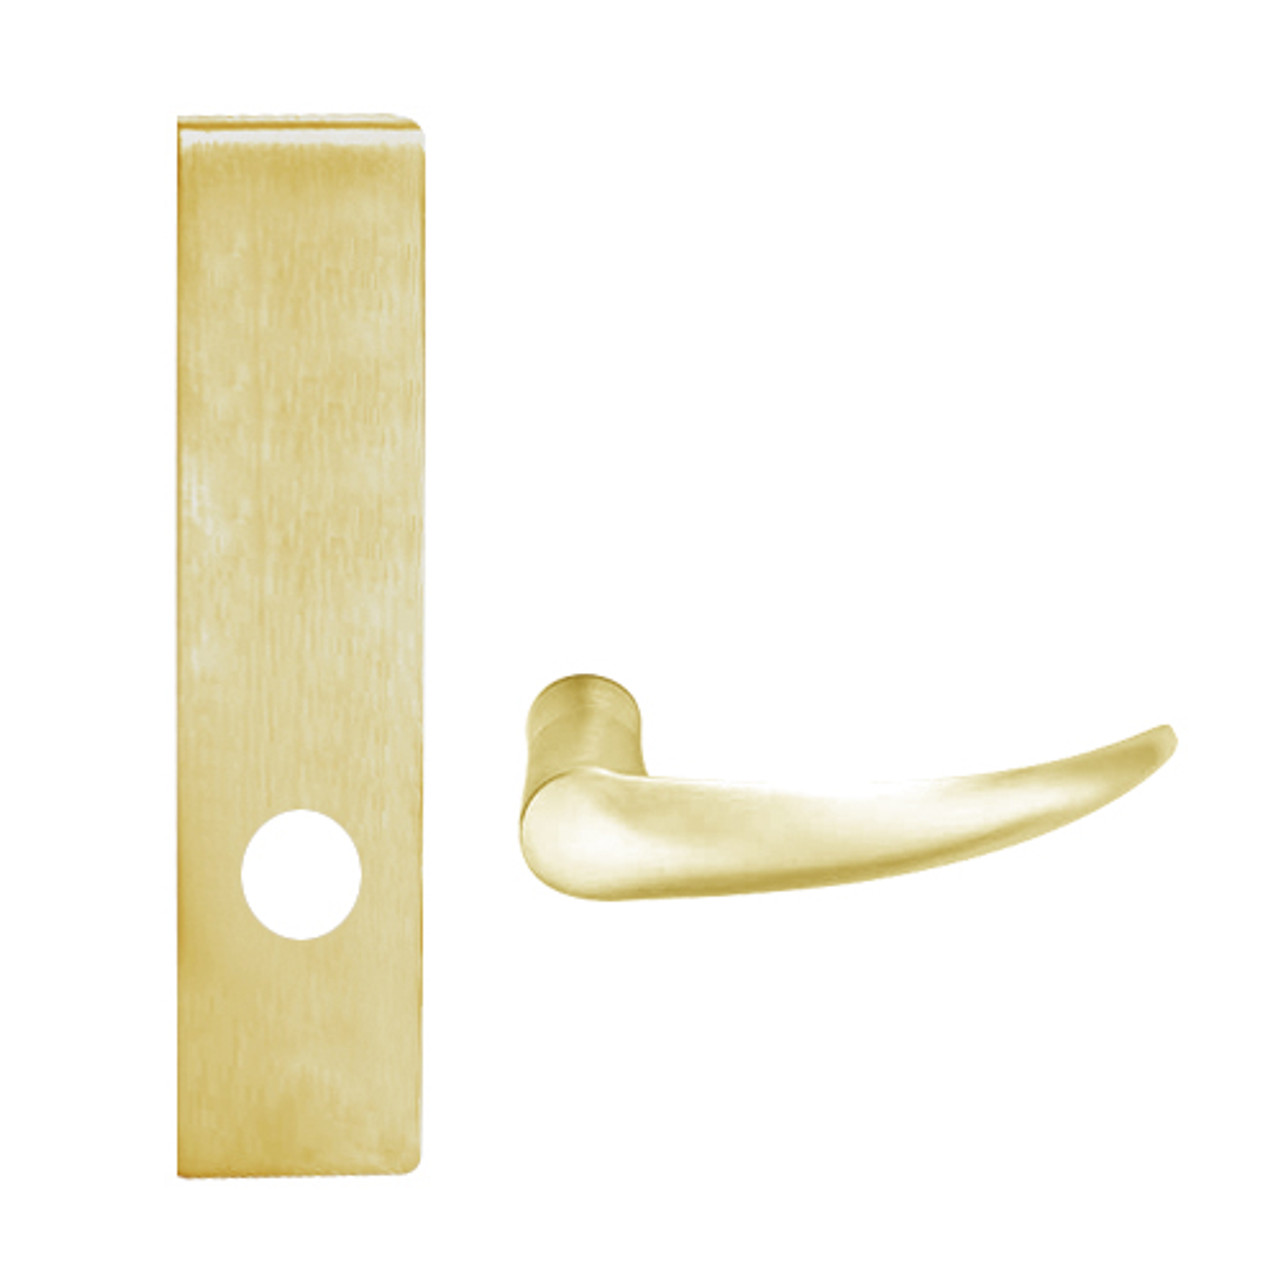 L9010-OME-L-605 Schlage L Series Passage Latch Commercial Mortise Lock with Omega Lever Design in Bright Brass